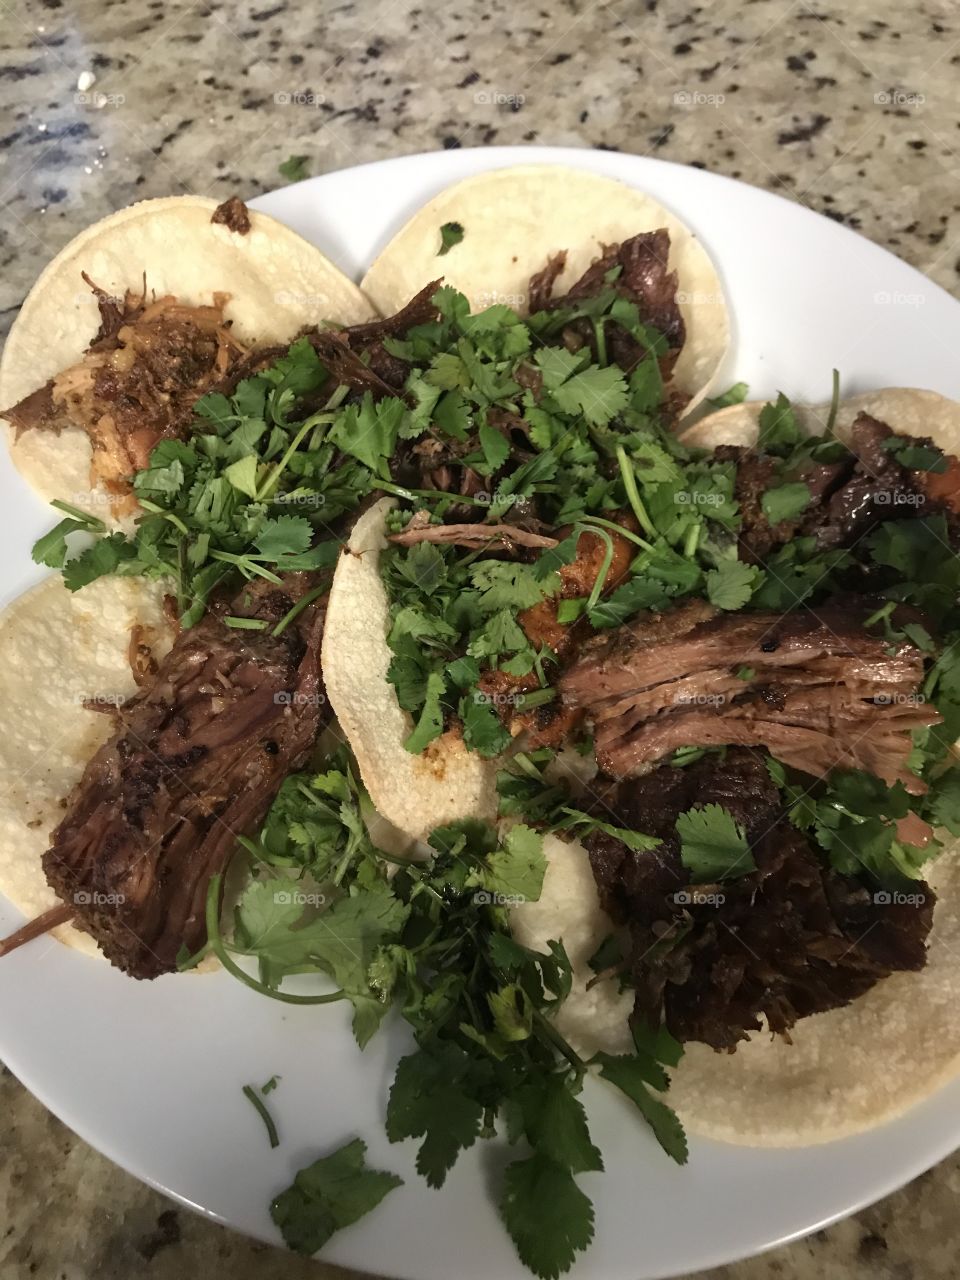 Was craving tacos  made my own  